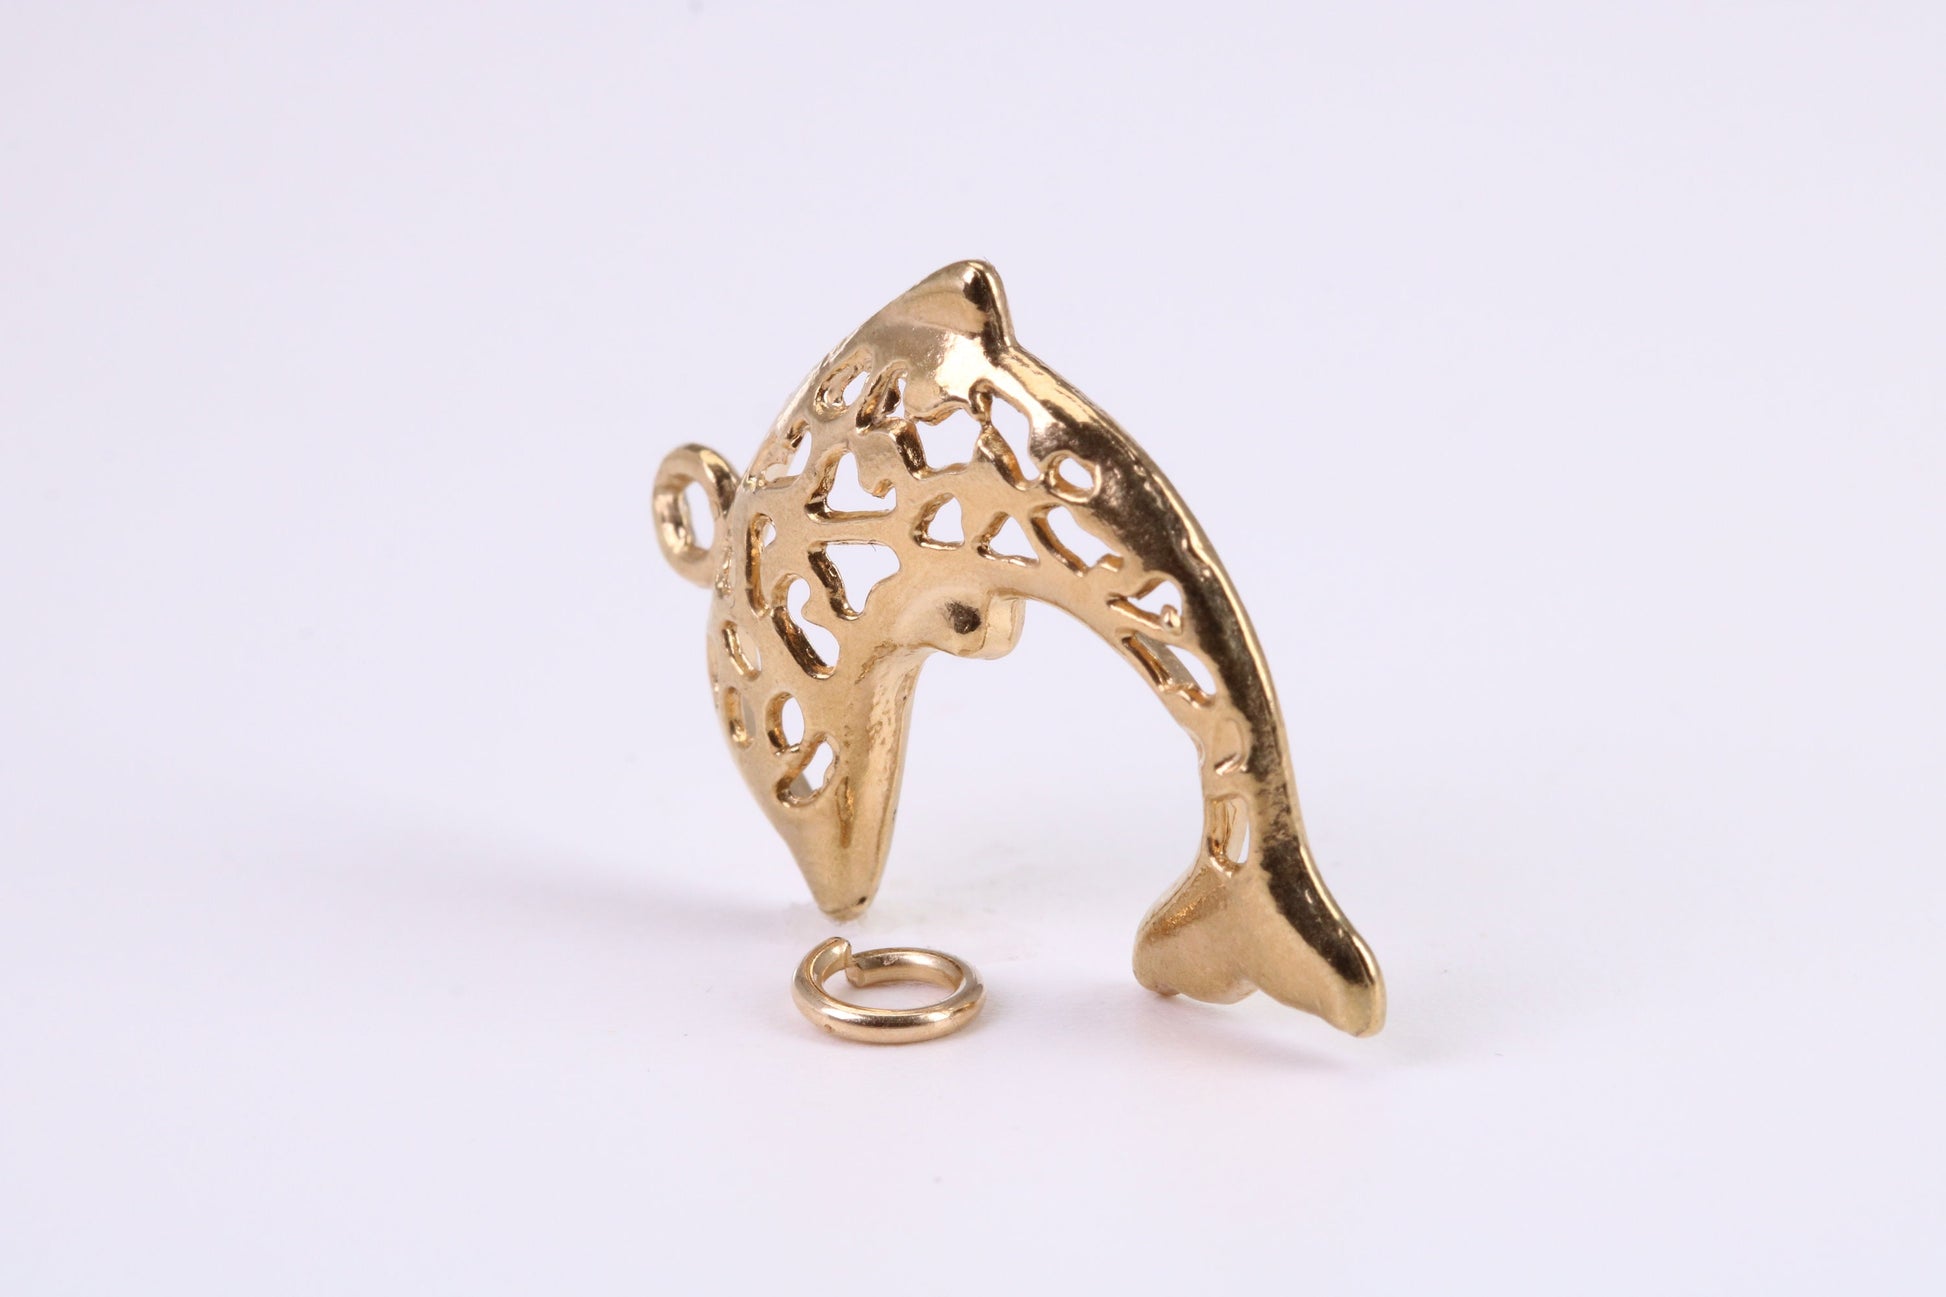 Fish Charm, Traditional Charm, Made from Solid Yellow Gold, British Hallmarked, Complete with Attachment Link